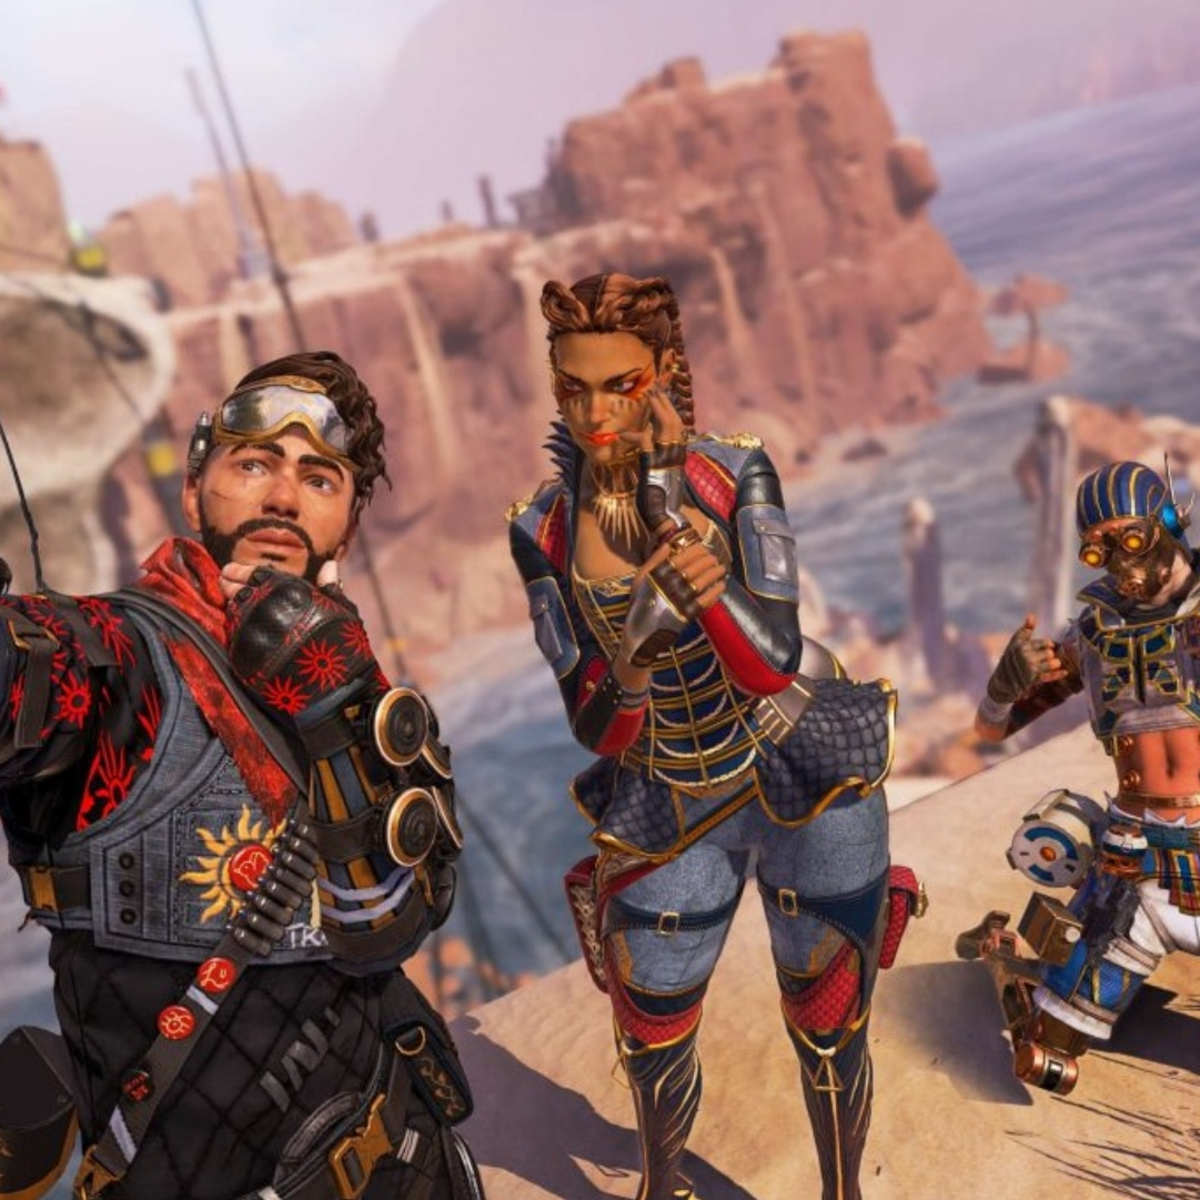 How to make a Private Match in Apex Legends